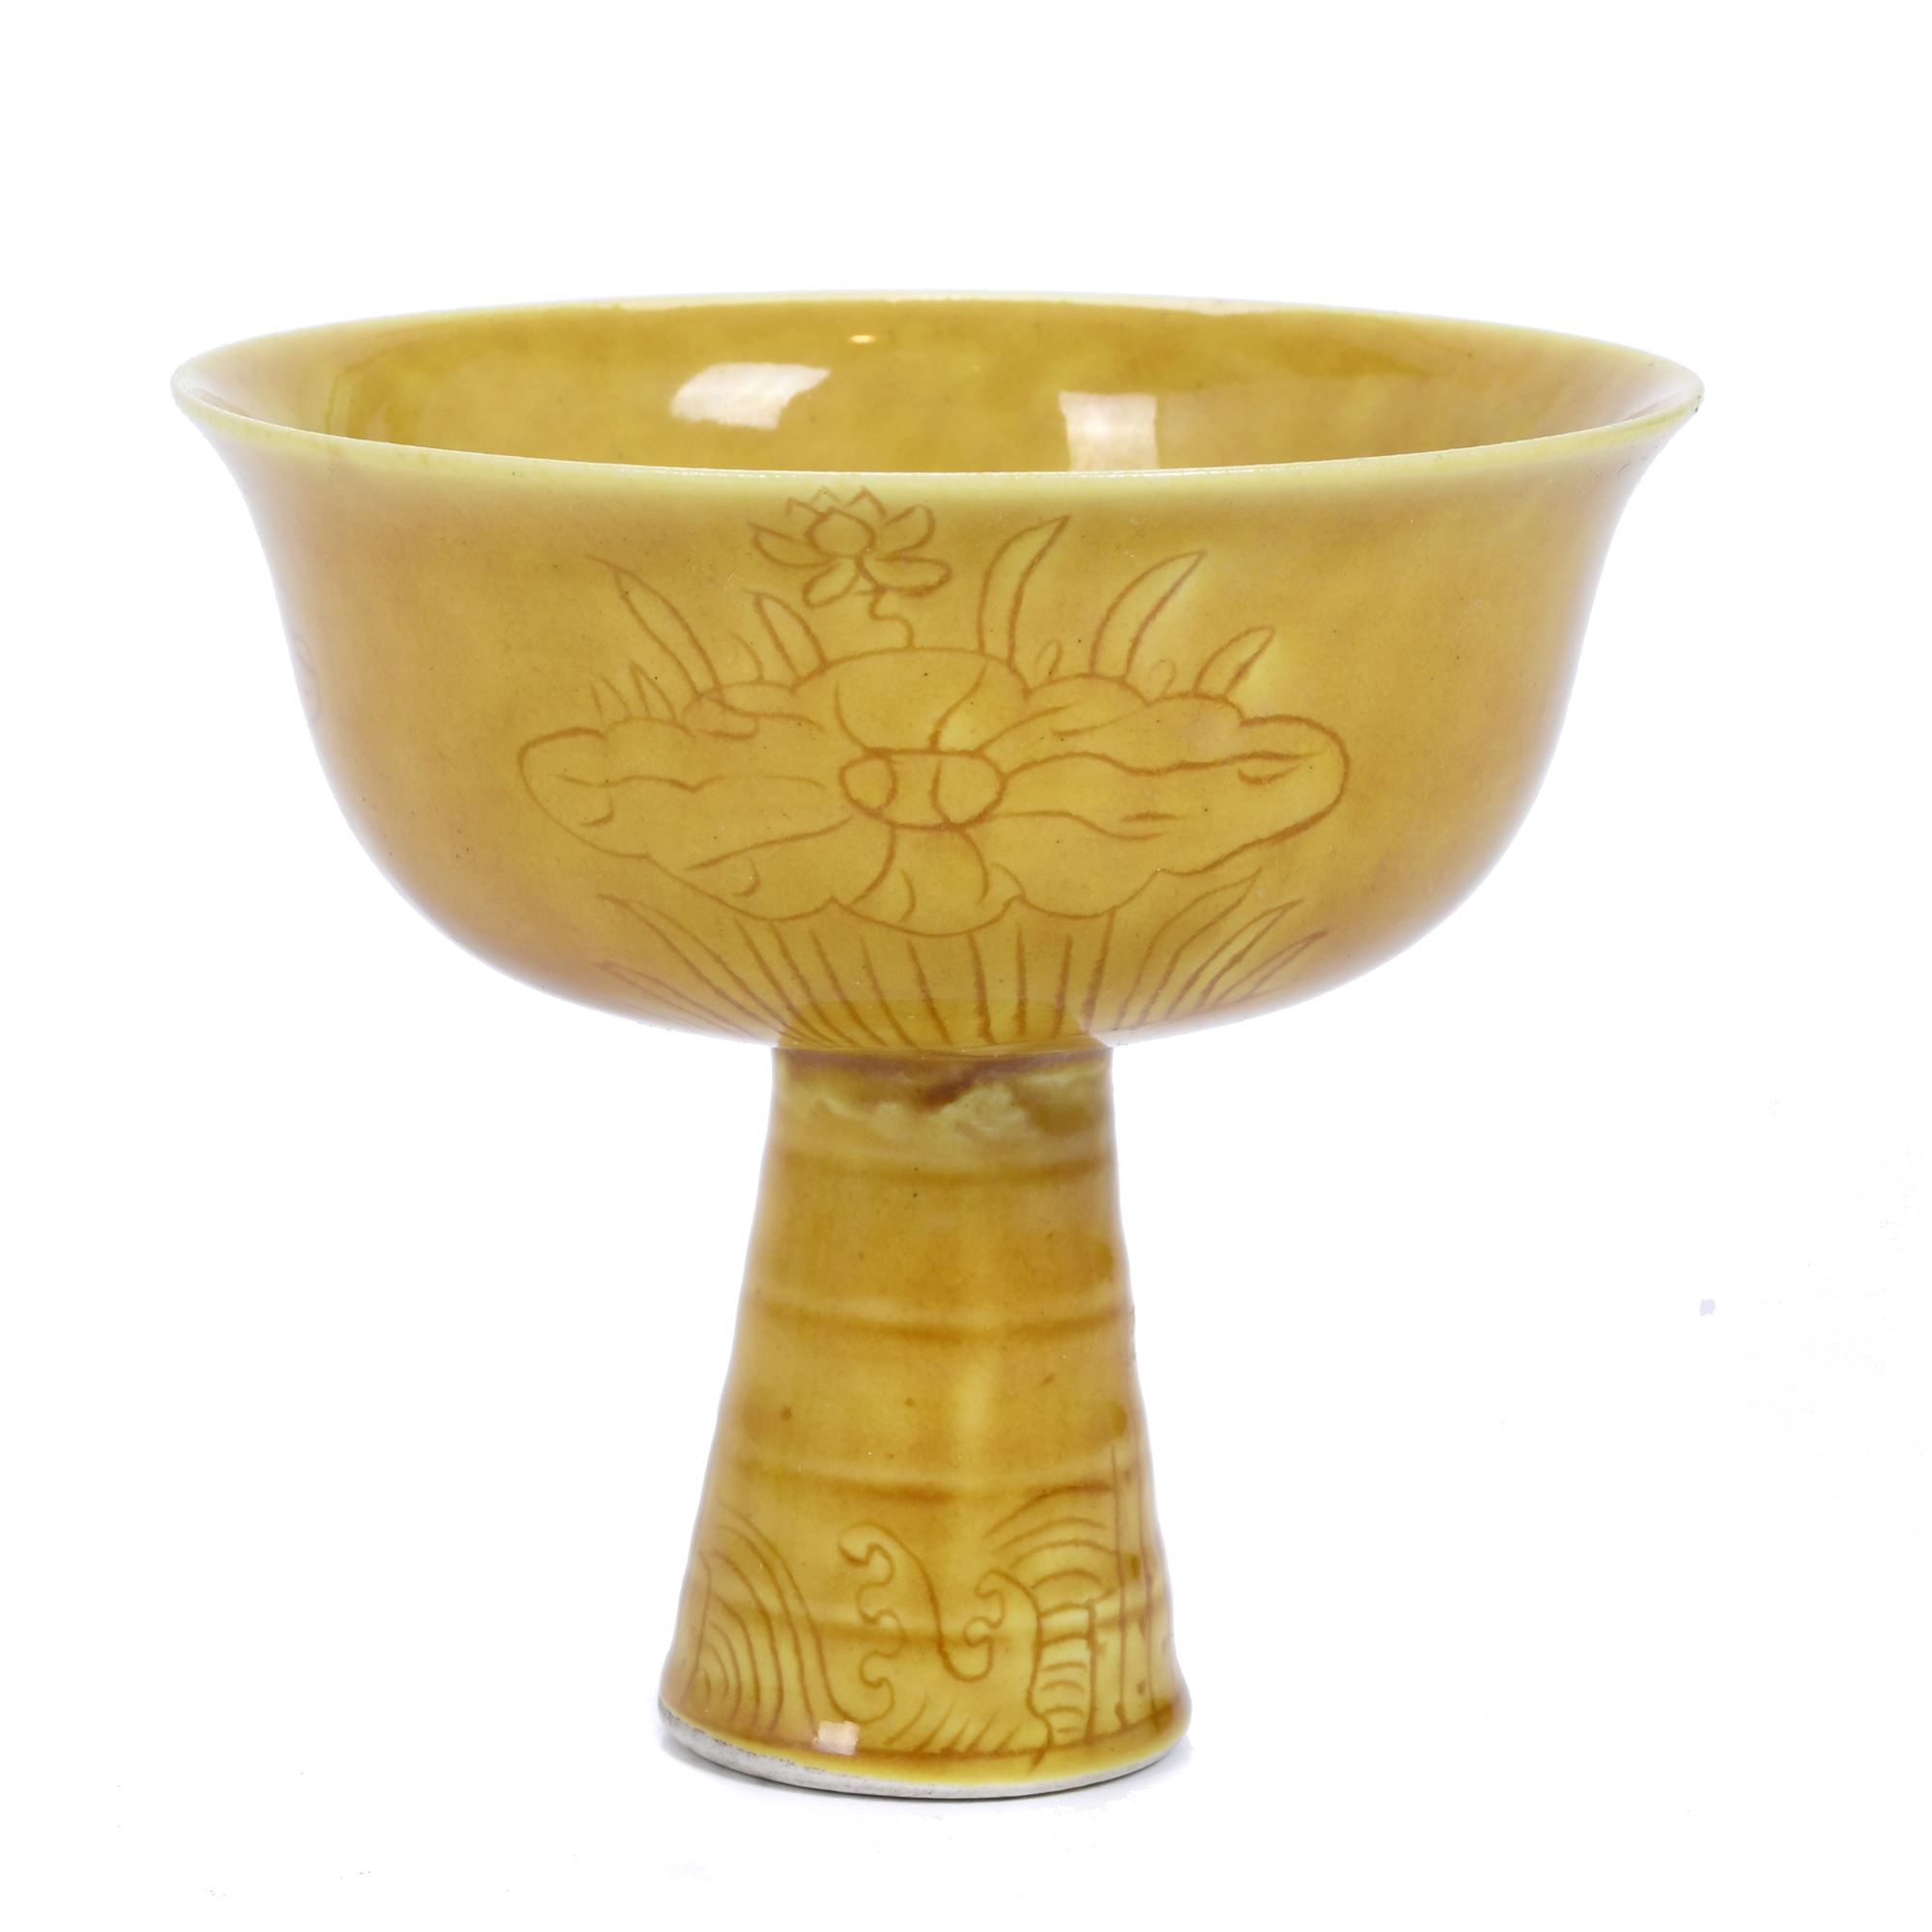 CHINESE LIBATION GOBLET, 20TH CENTURY.